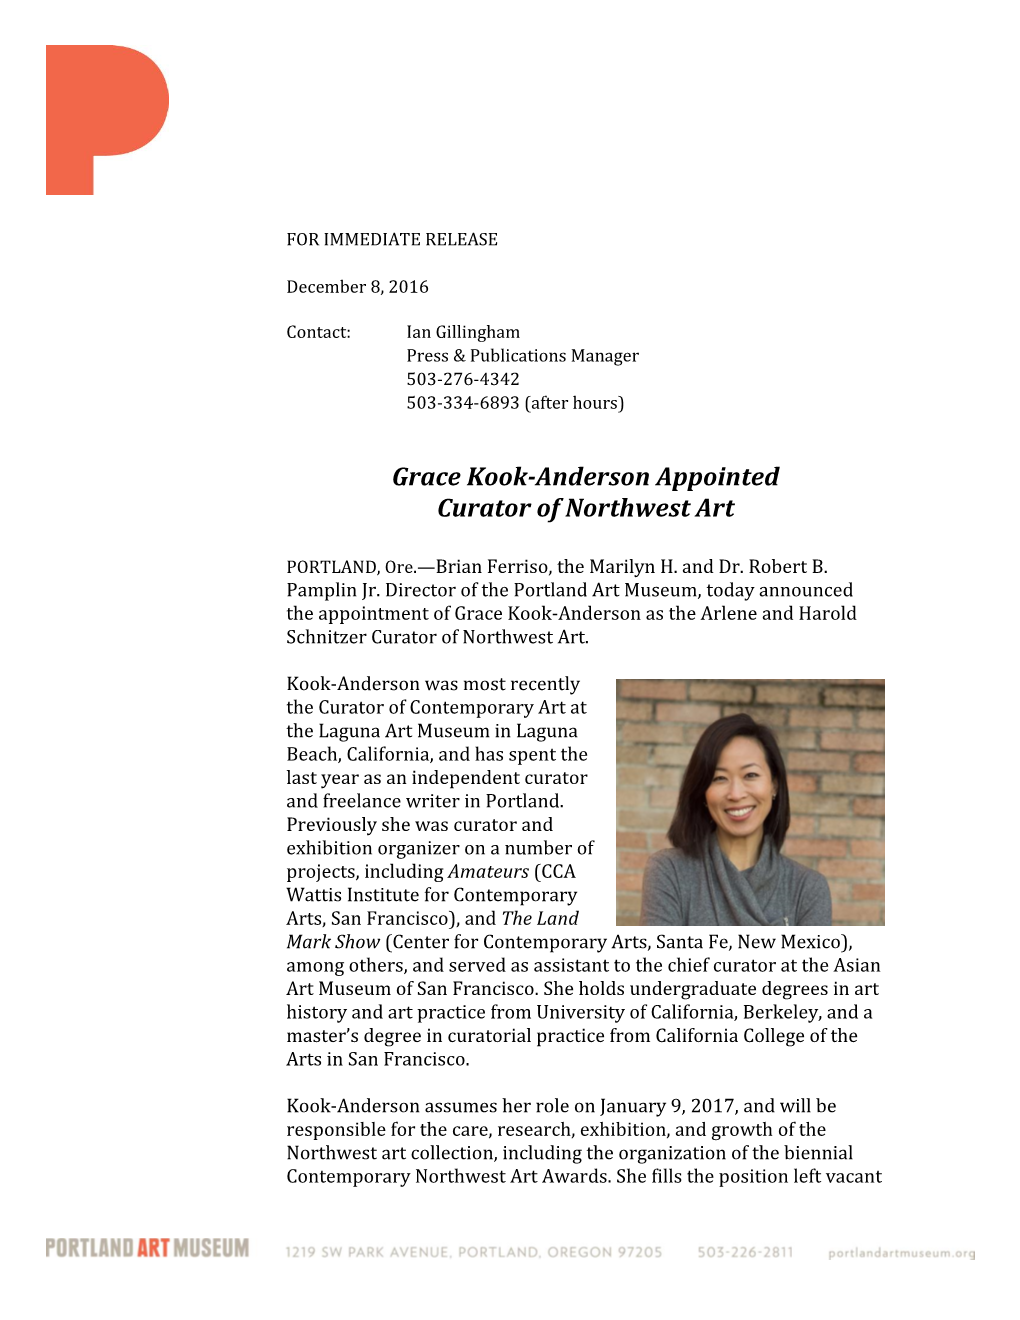 Grace Kook-Anderson Appointed Curator of Northwest Art